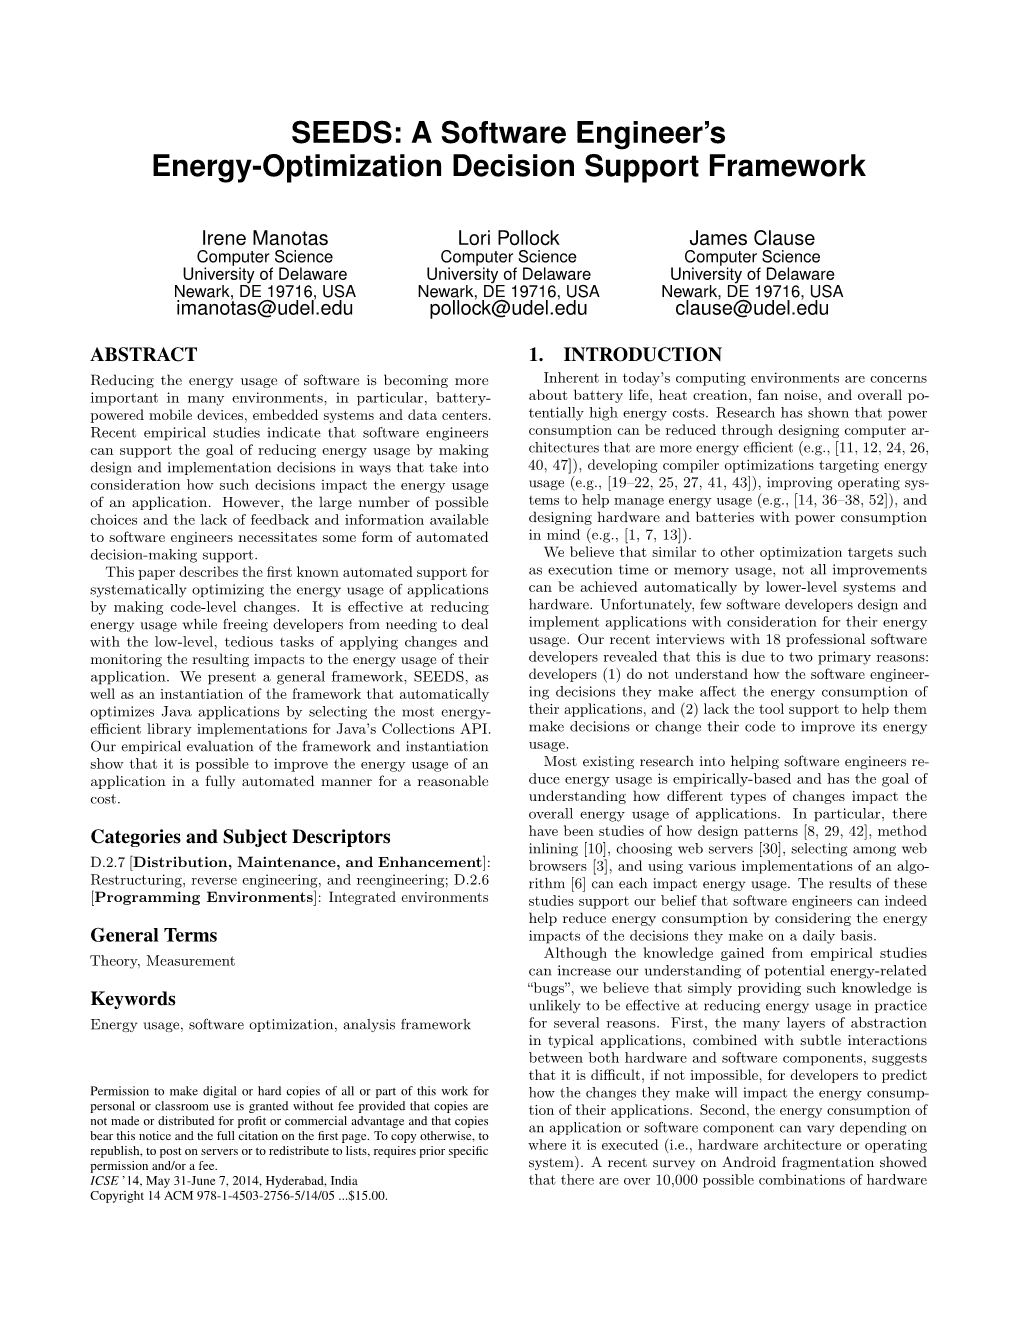 SEEDS: a Software Engineer's Energy-Optimization Decision Support